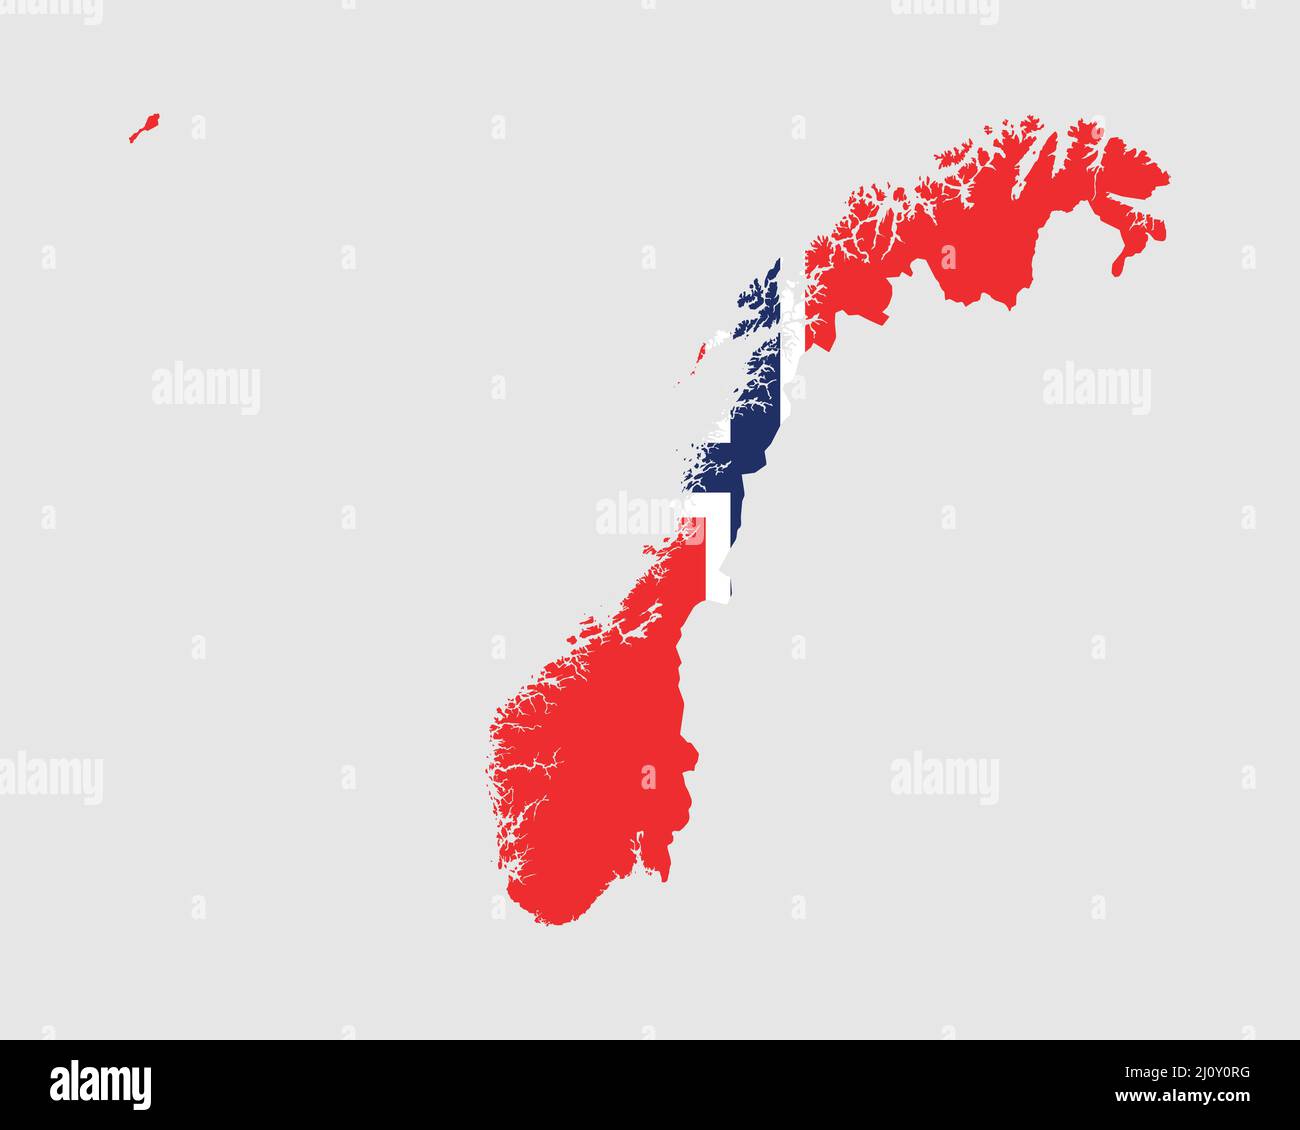 Norway Flag Map. Map of the Kingdom of Norway with the Norwegian country banner. Vector Illustration. Stock Vector